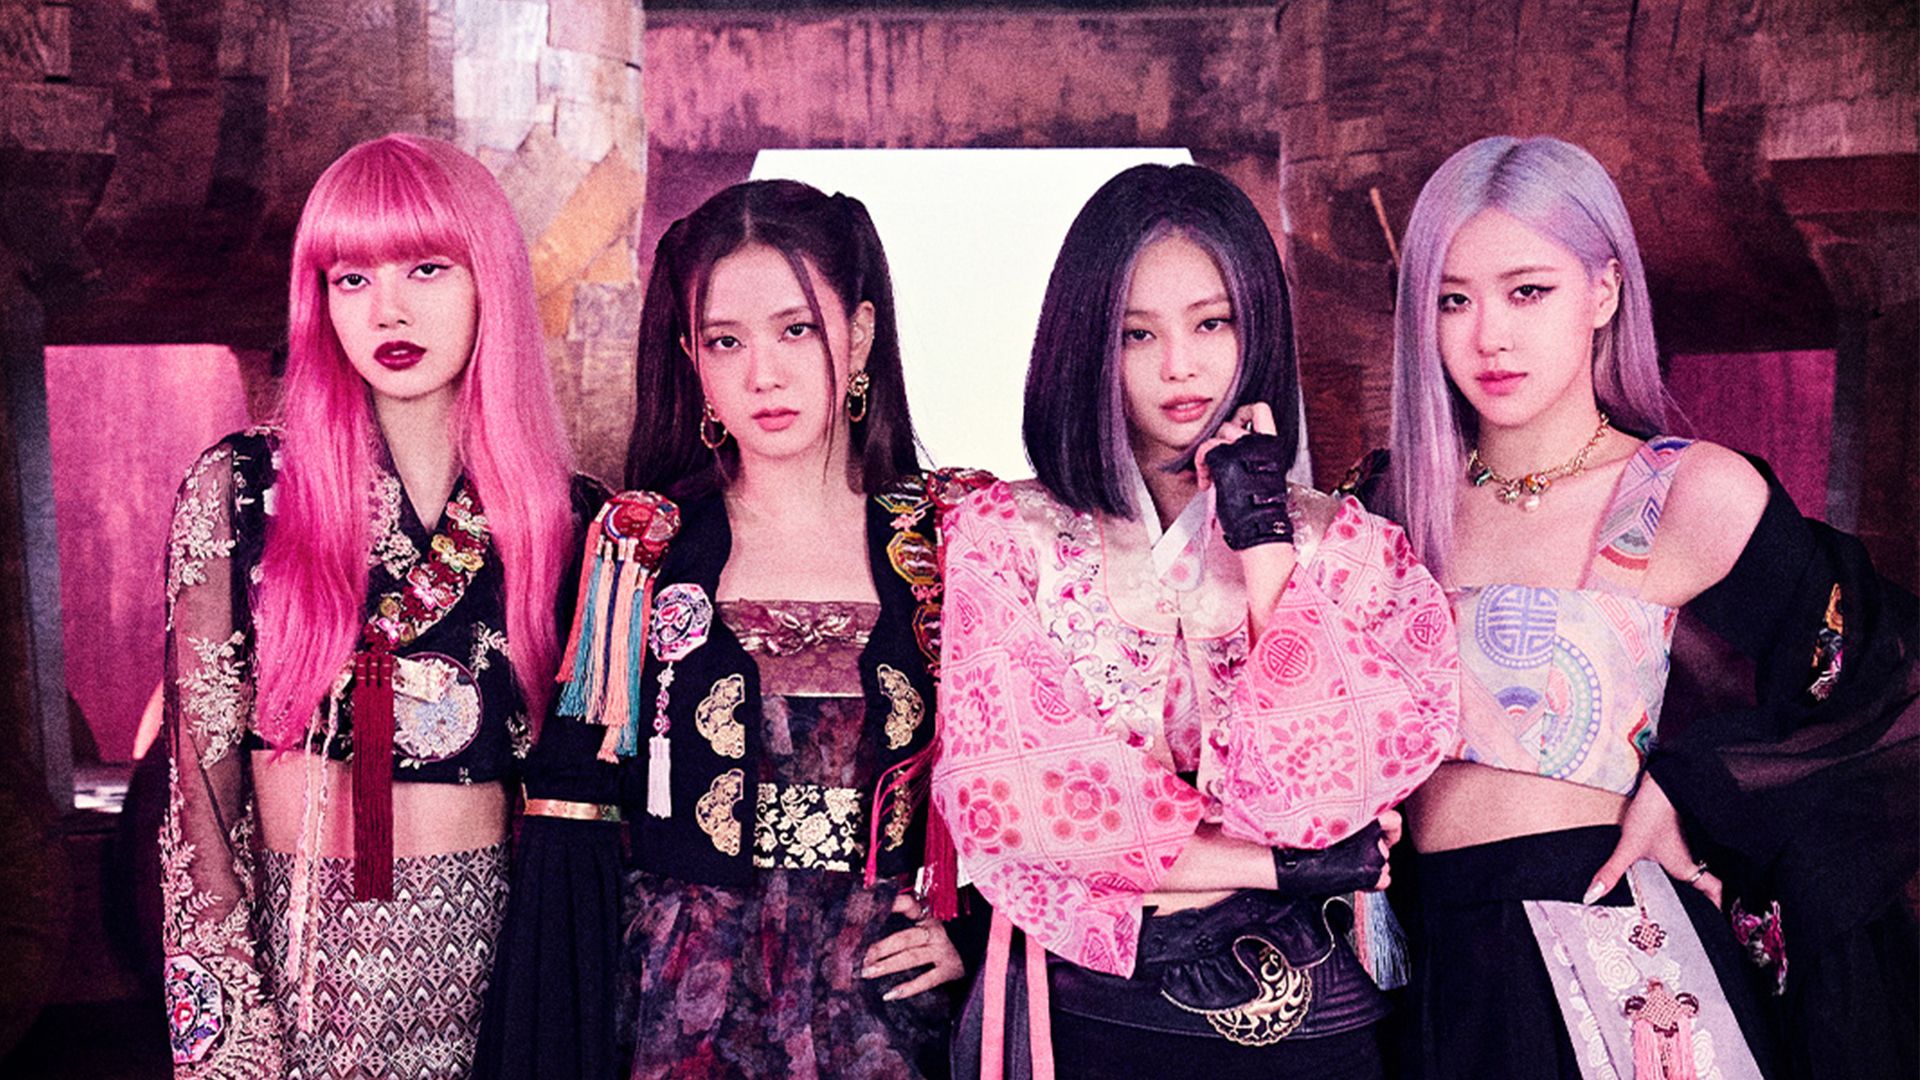 BLACKPINK's 'How You Like That' MV achieves another record after reaching 200 million views